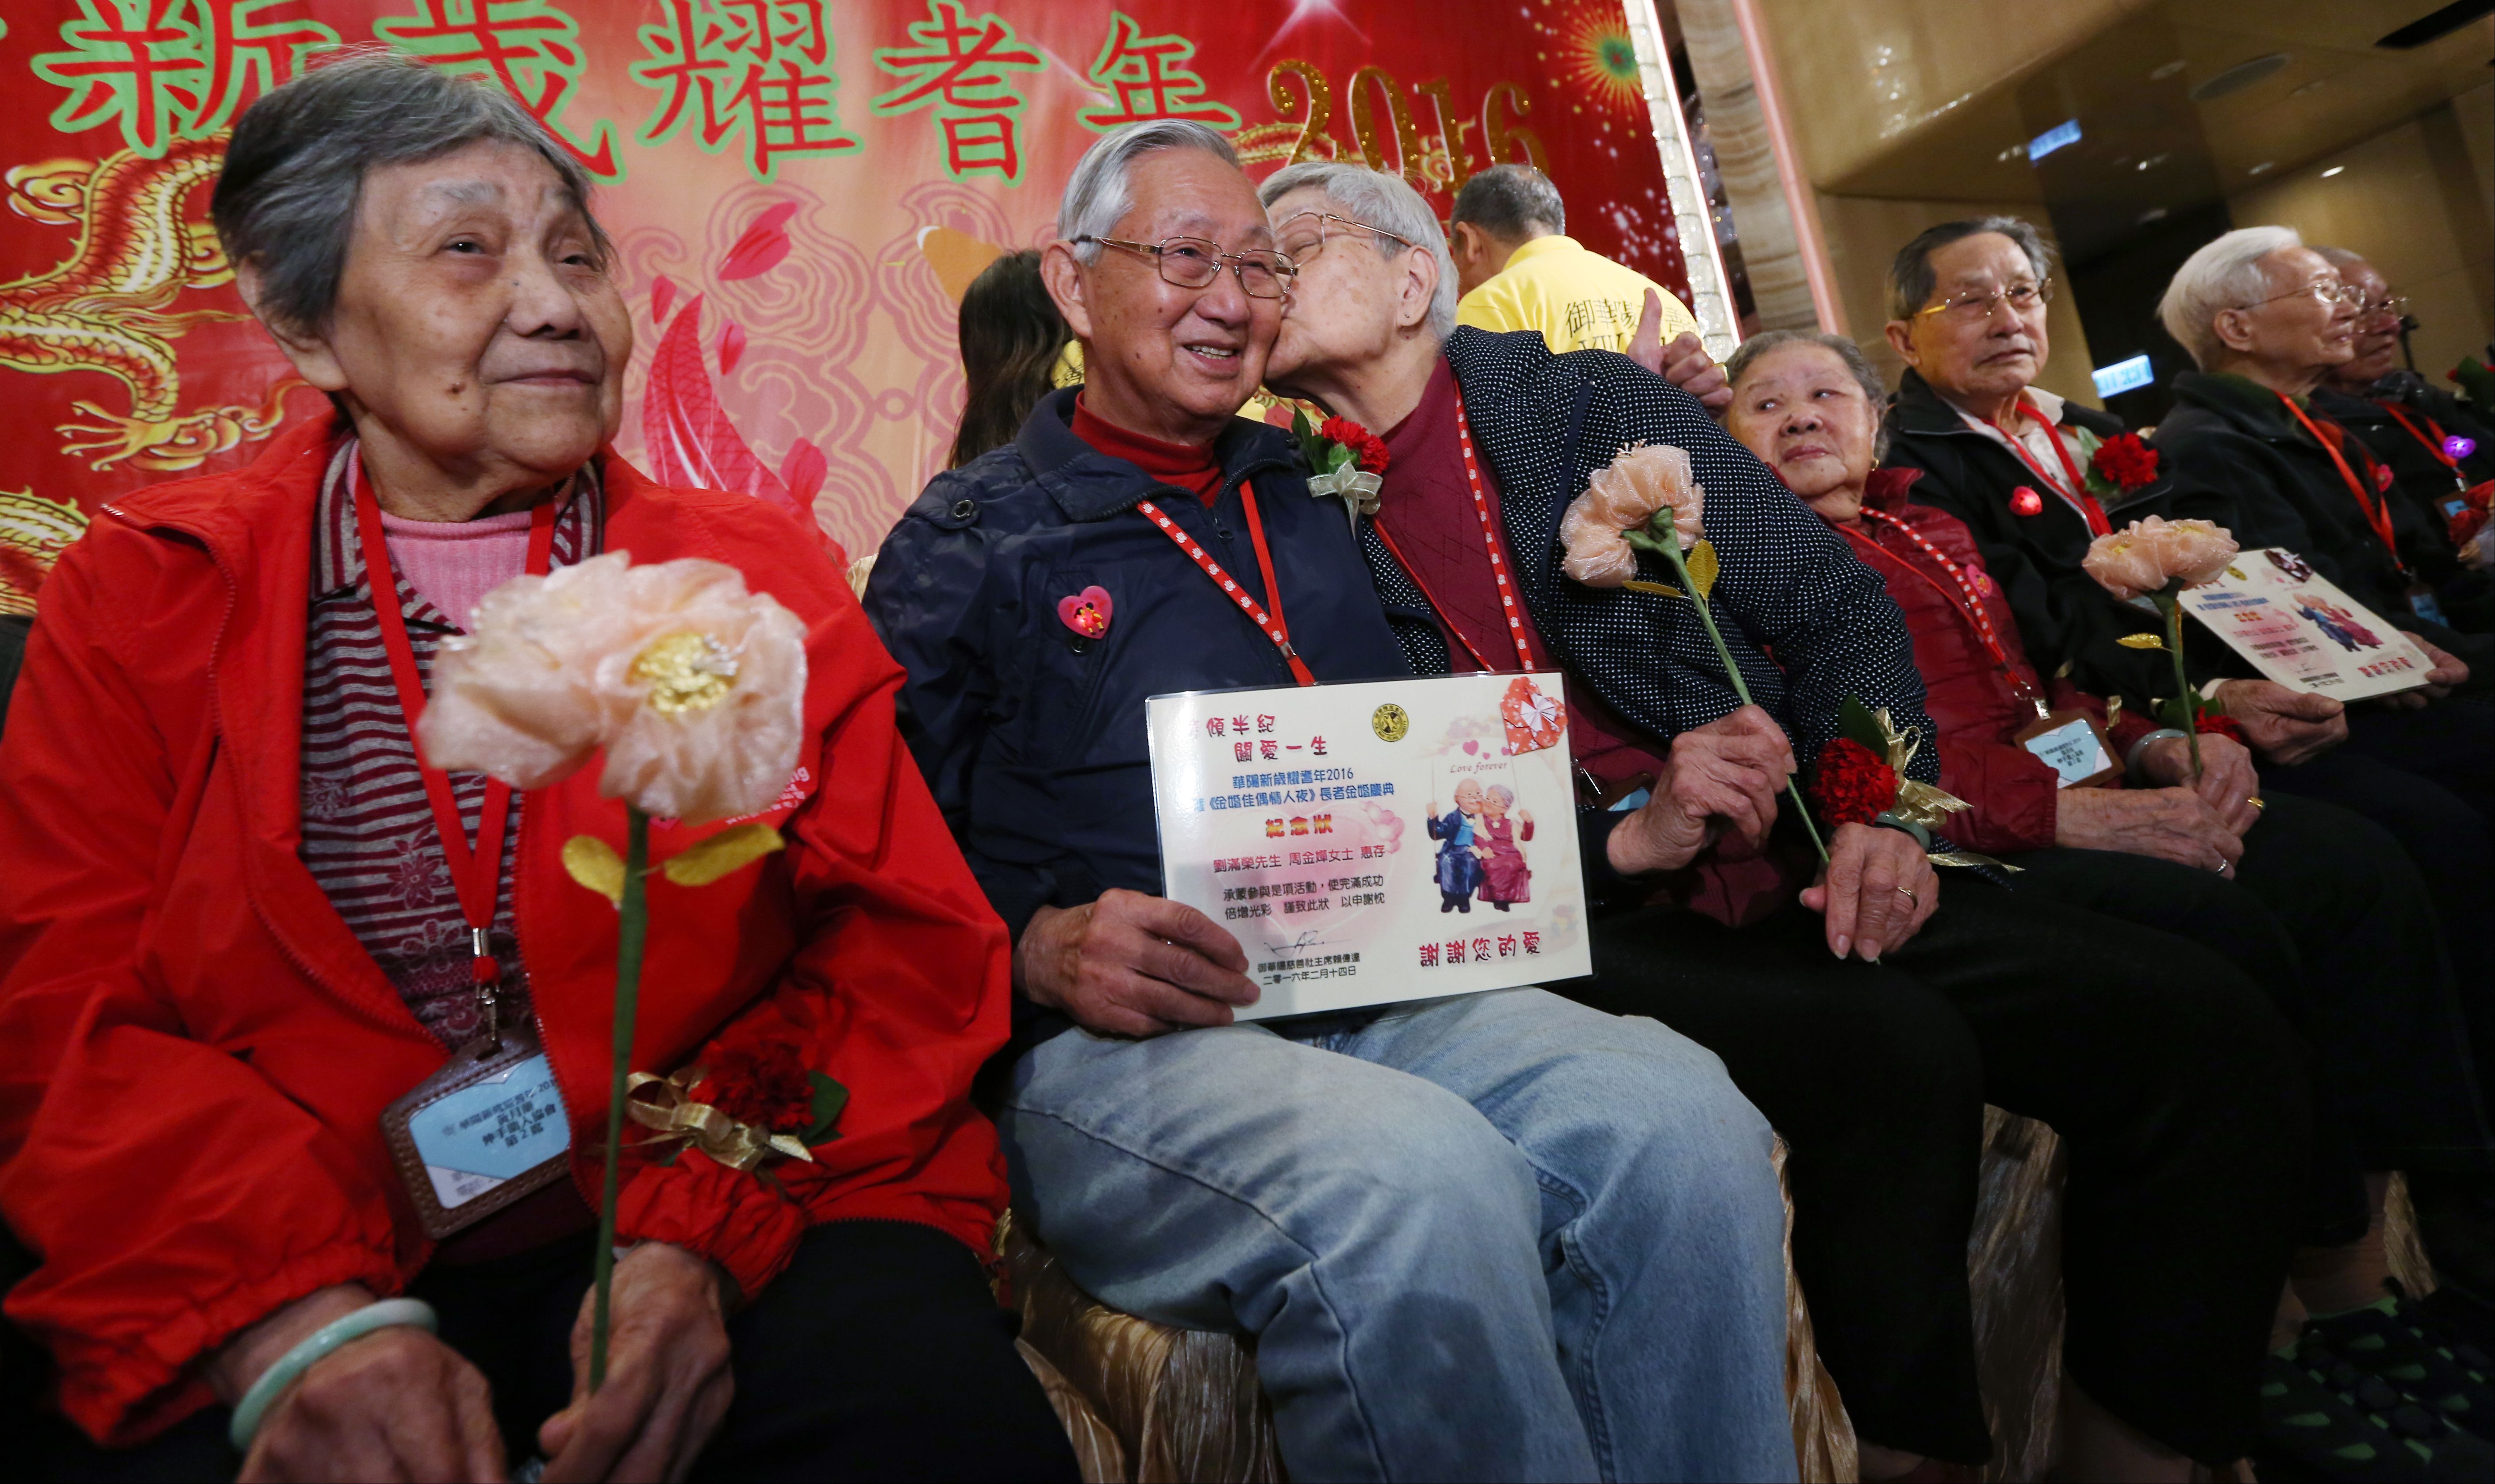 In this image, a line of elderly people sit with flowers and signs 